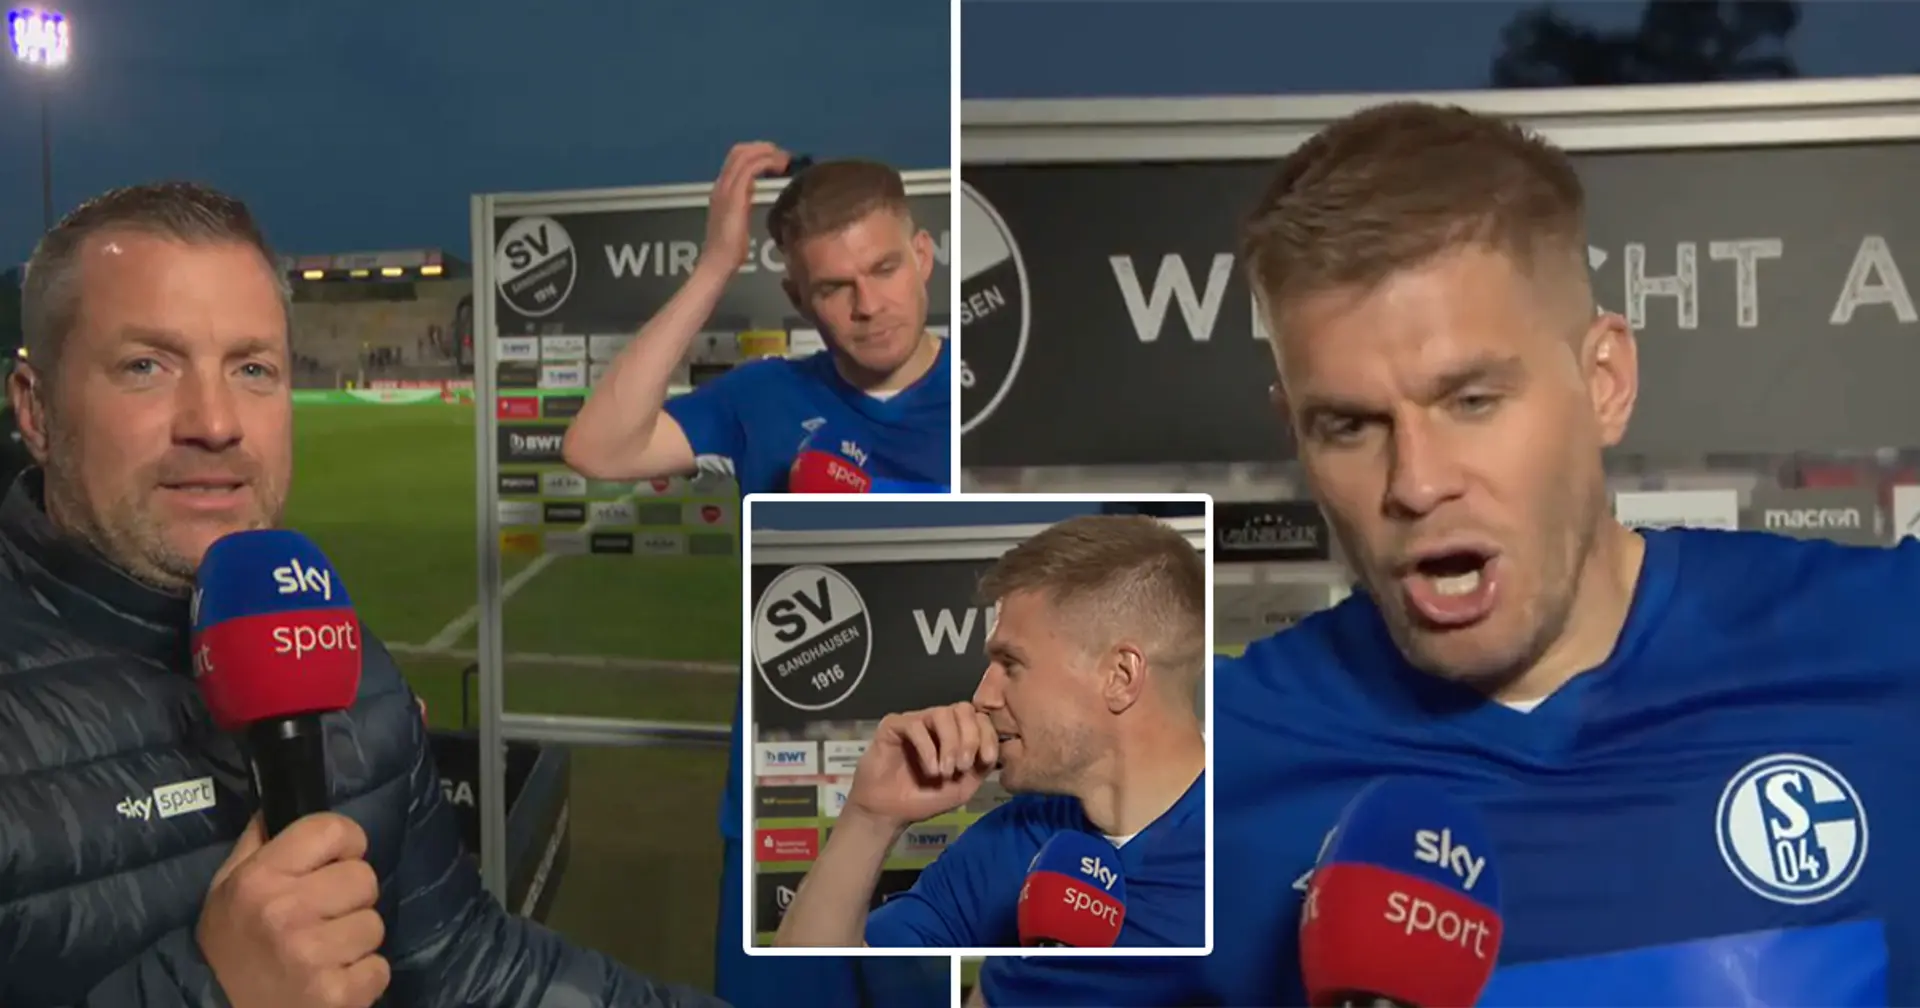 'Never heard more dead vocal chords': Schalke player gets his vocal chords destroyed, tries to give interview after the game